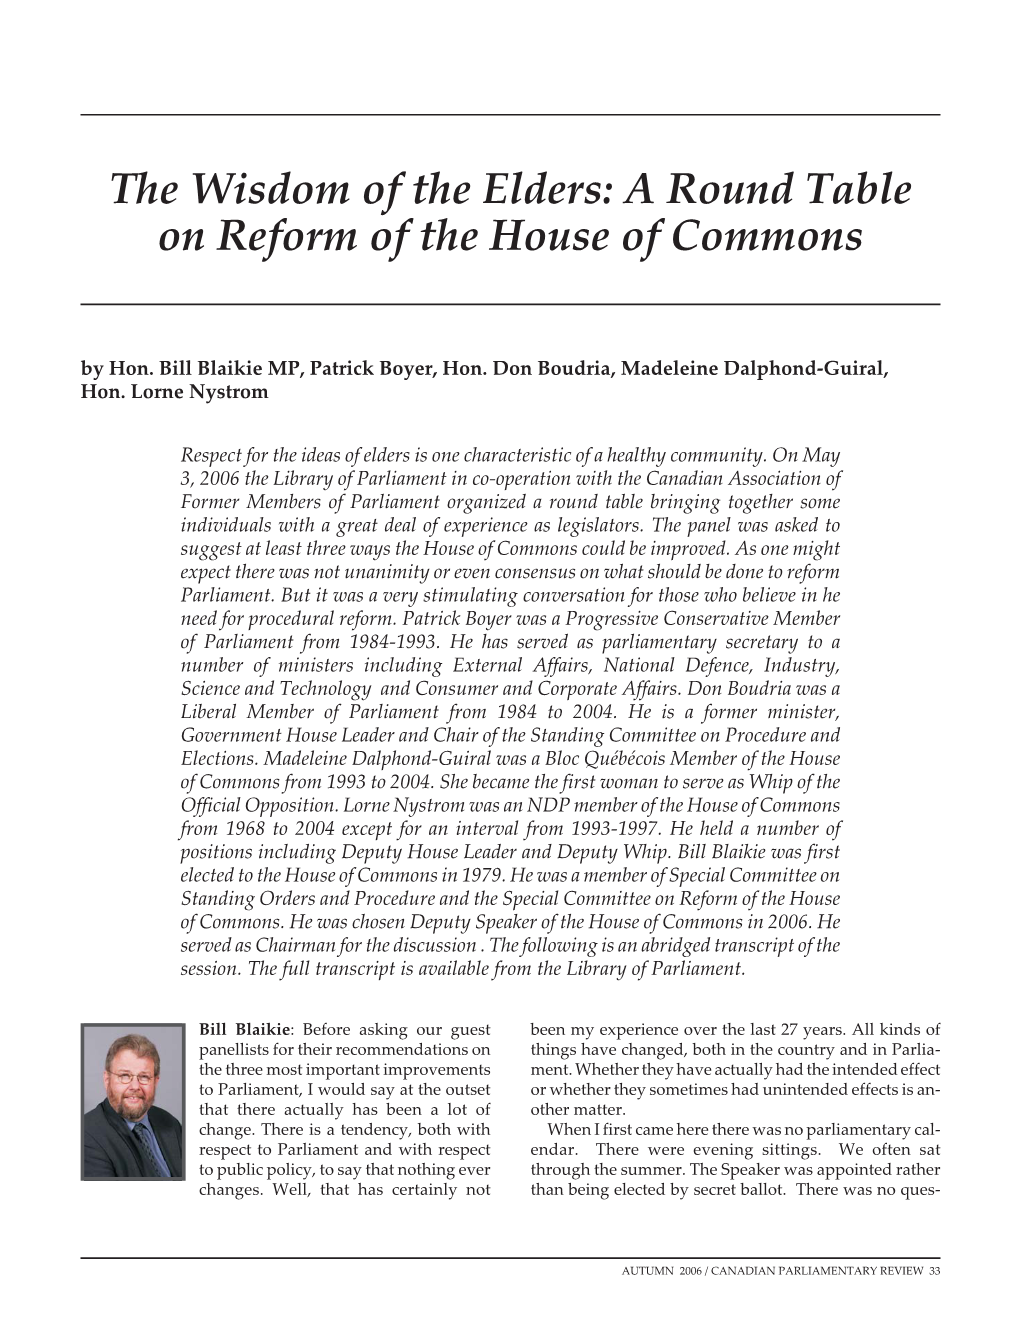 The Wisdom of the Elders: a Round Table on Reform of the House of Commons